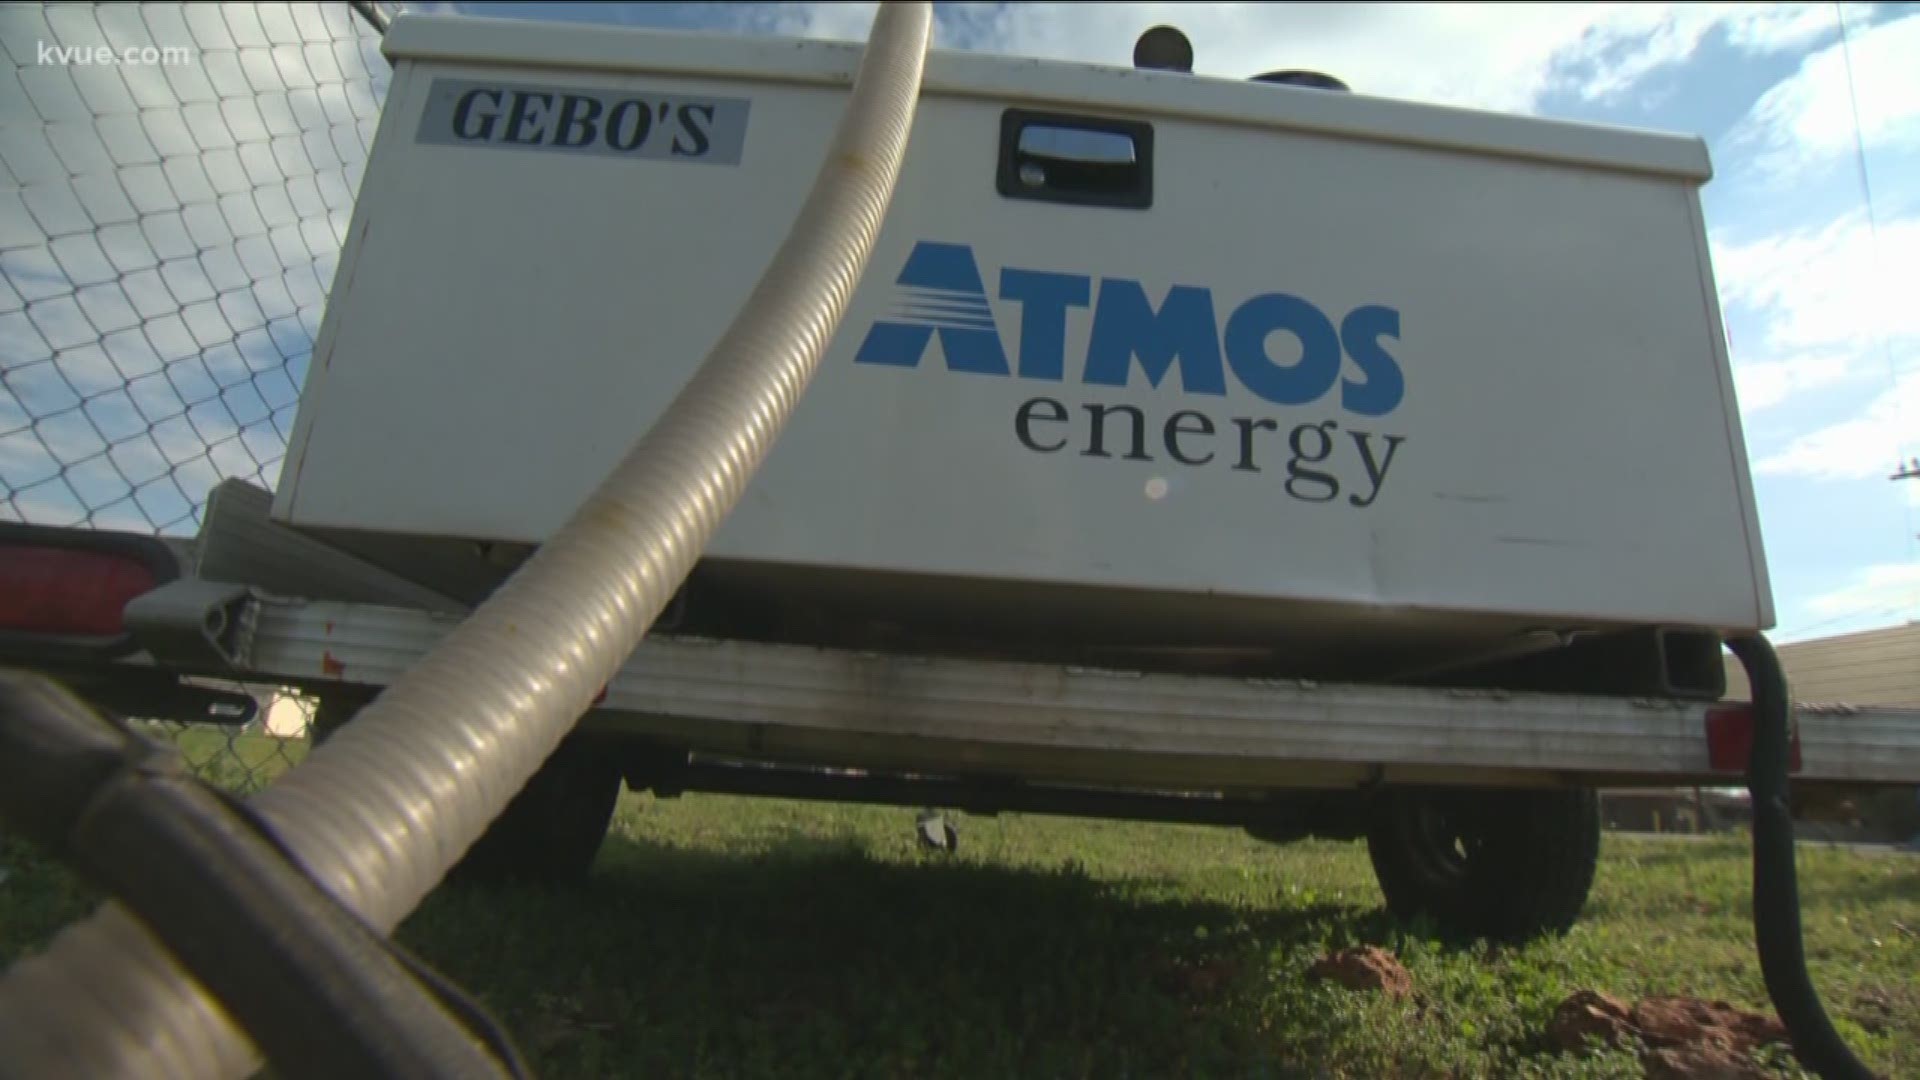 It's been almost a month since a natural gas leak forced people out of parts of Georgetown.